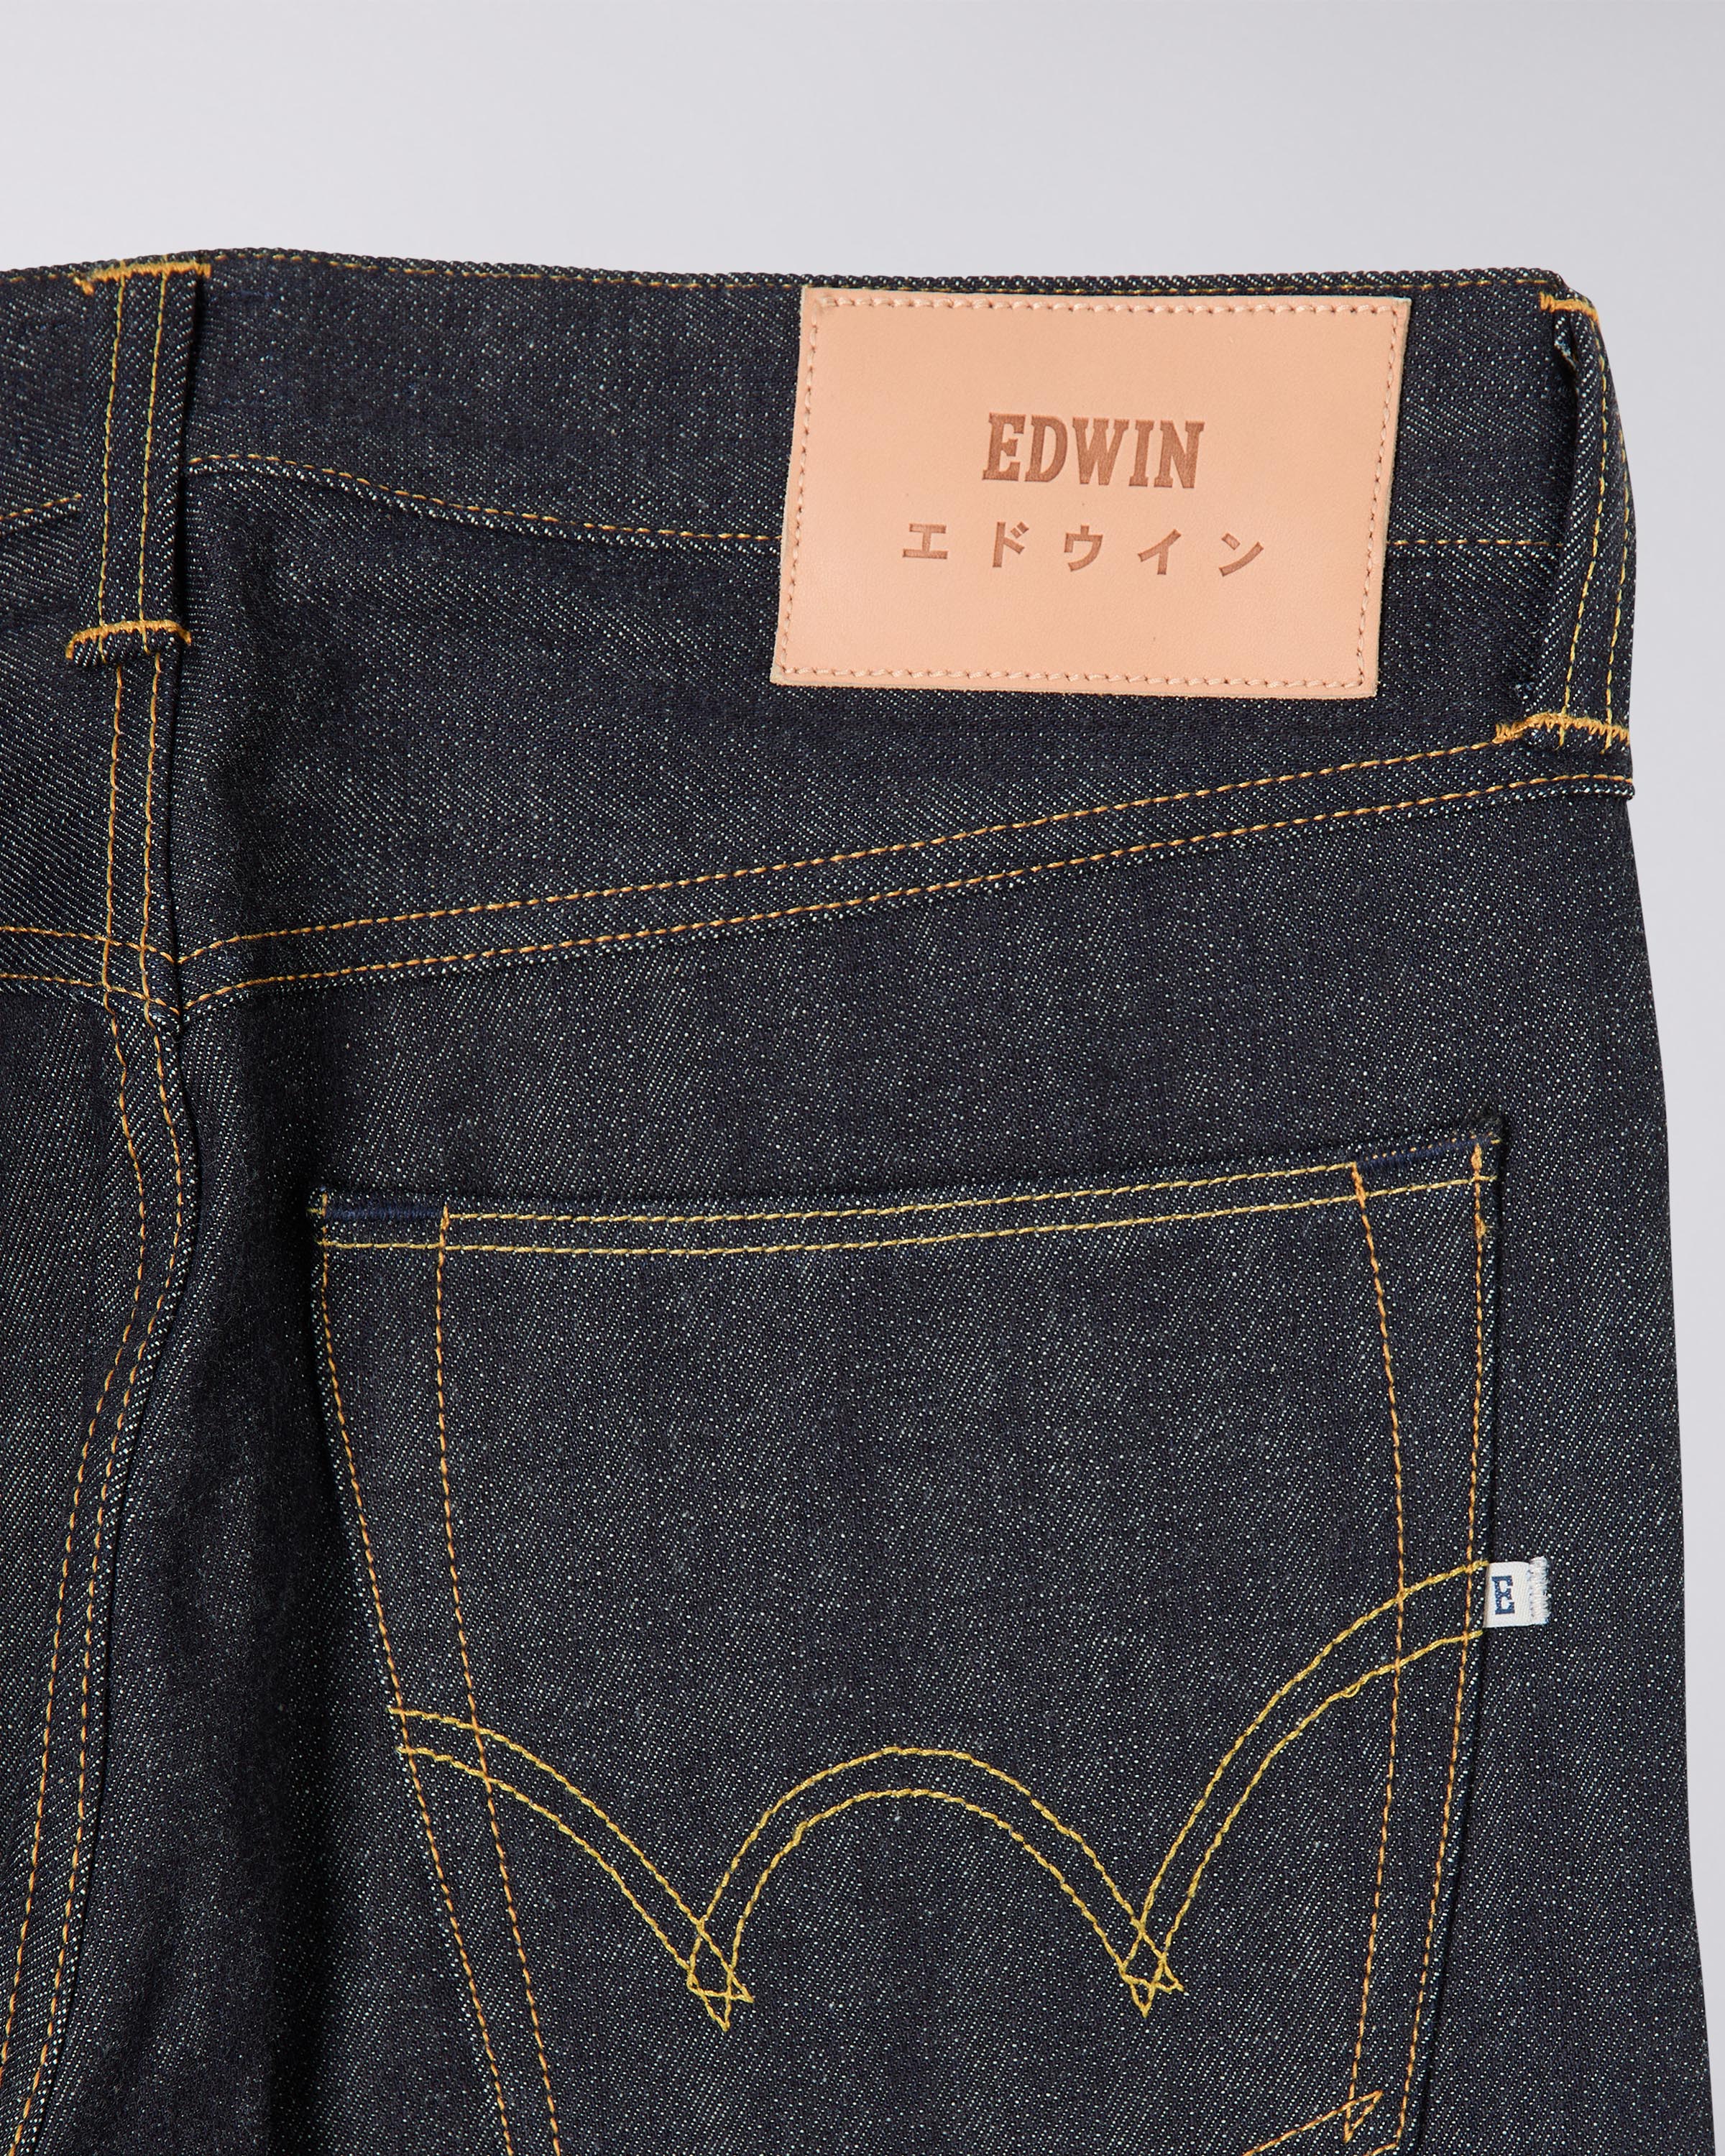 EDWIN ED-47 Regular Straight Jeans Red Listed Selvage Denim Blue  Unwashed |EDWIN Europe